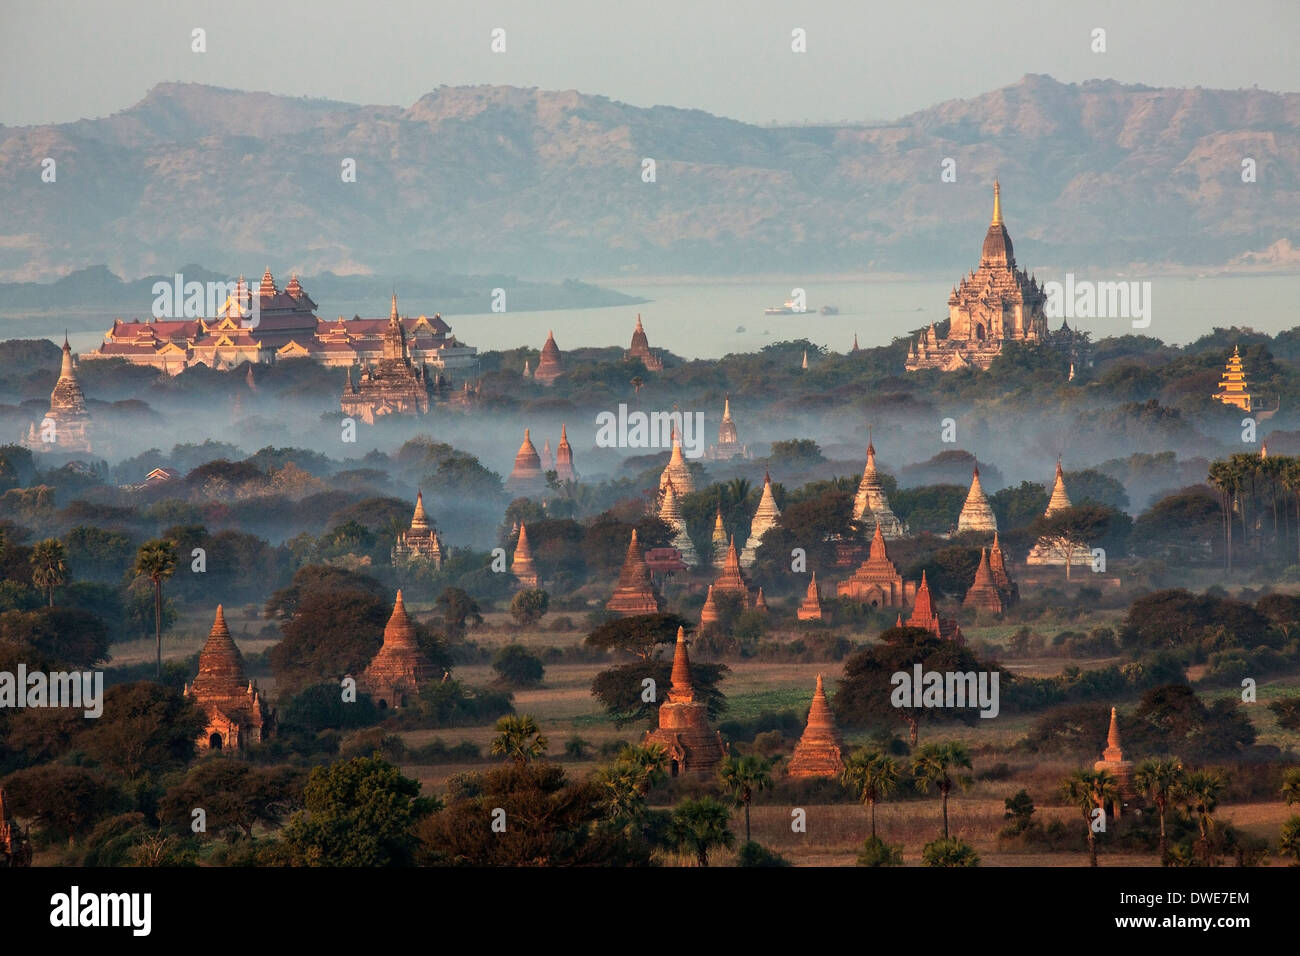 The temples of the Archaeological Zone in Bagan in the early morning sunlight. In the distance is the Irrawaddy River. Myanmar Stock Photo